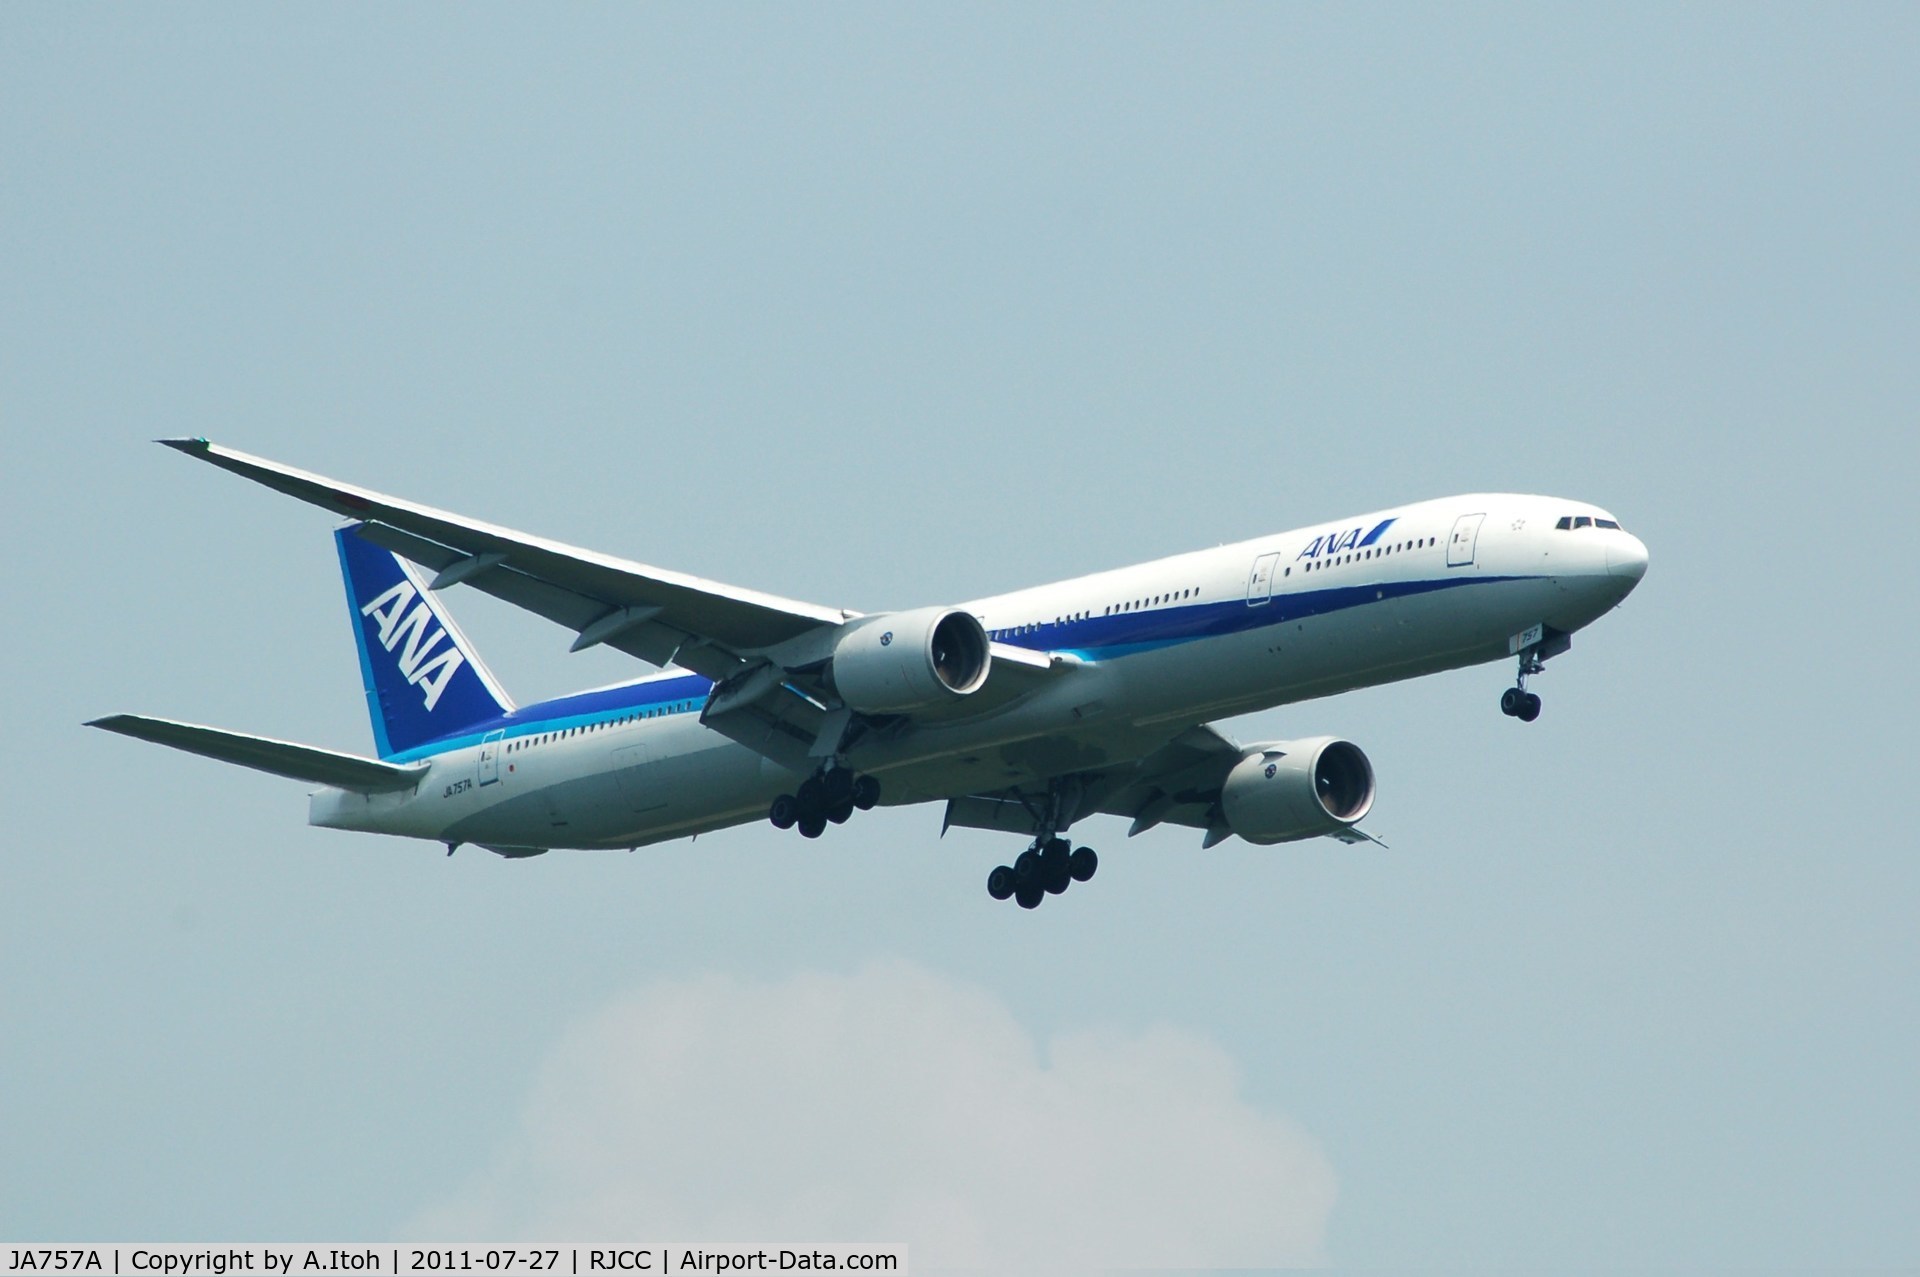 JA757A, 2003 Boeing 777-381 C/N 27040, ANA B777  Approach at rwy 19L  New Chitose